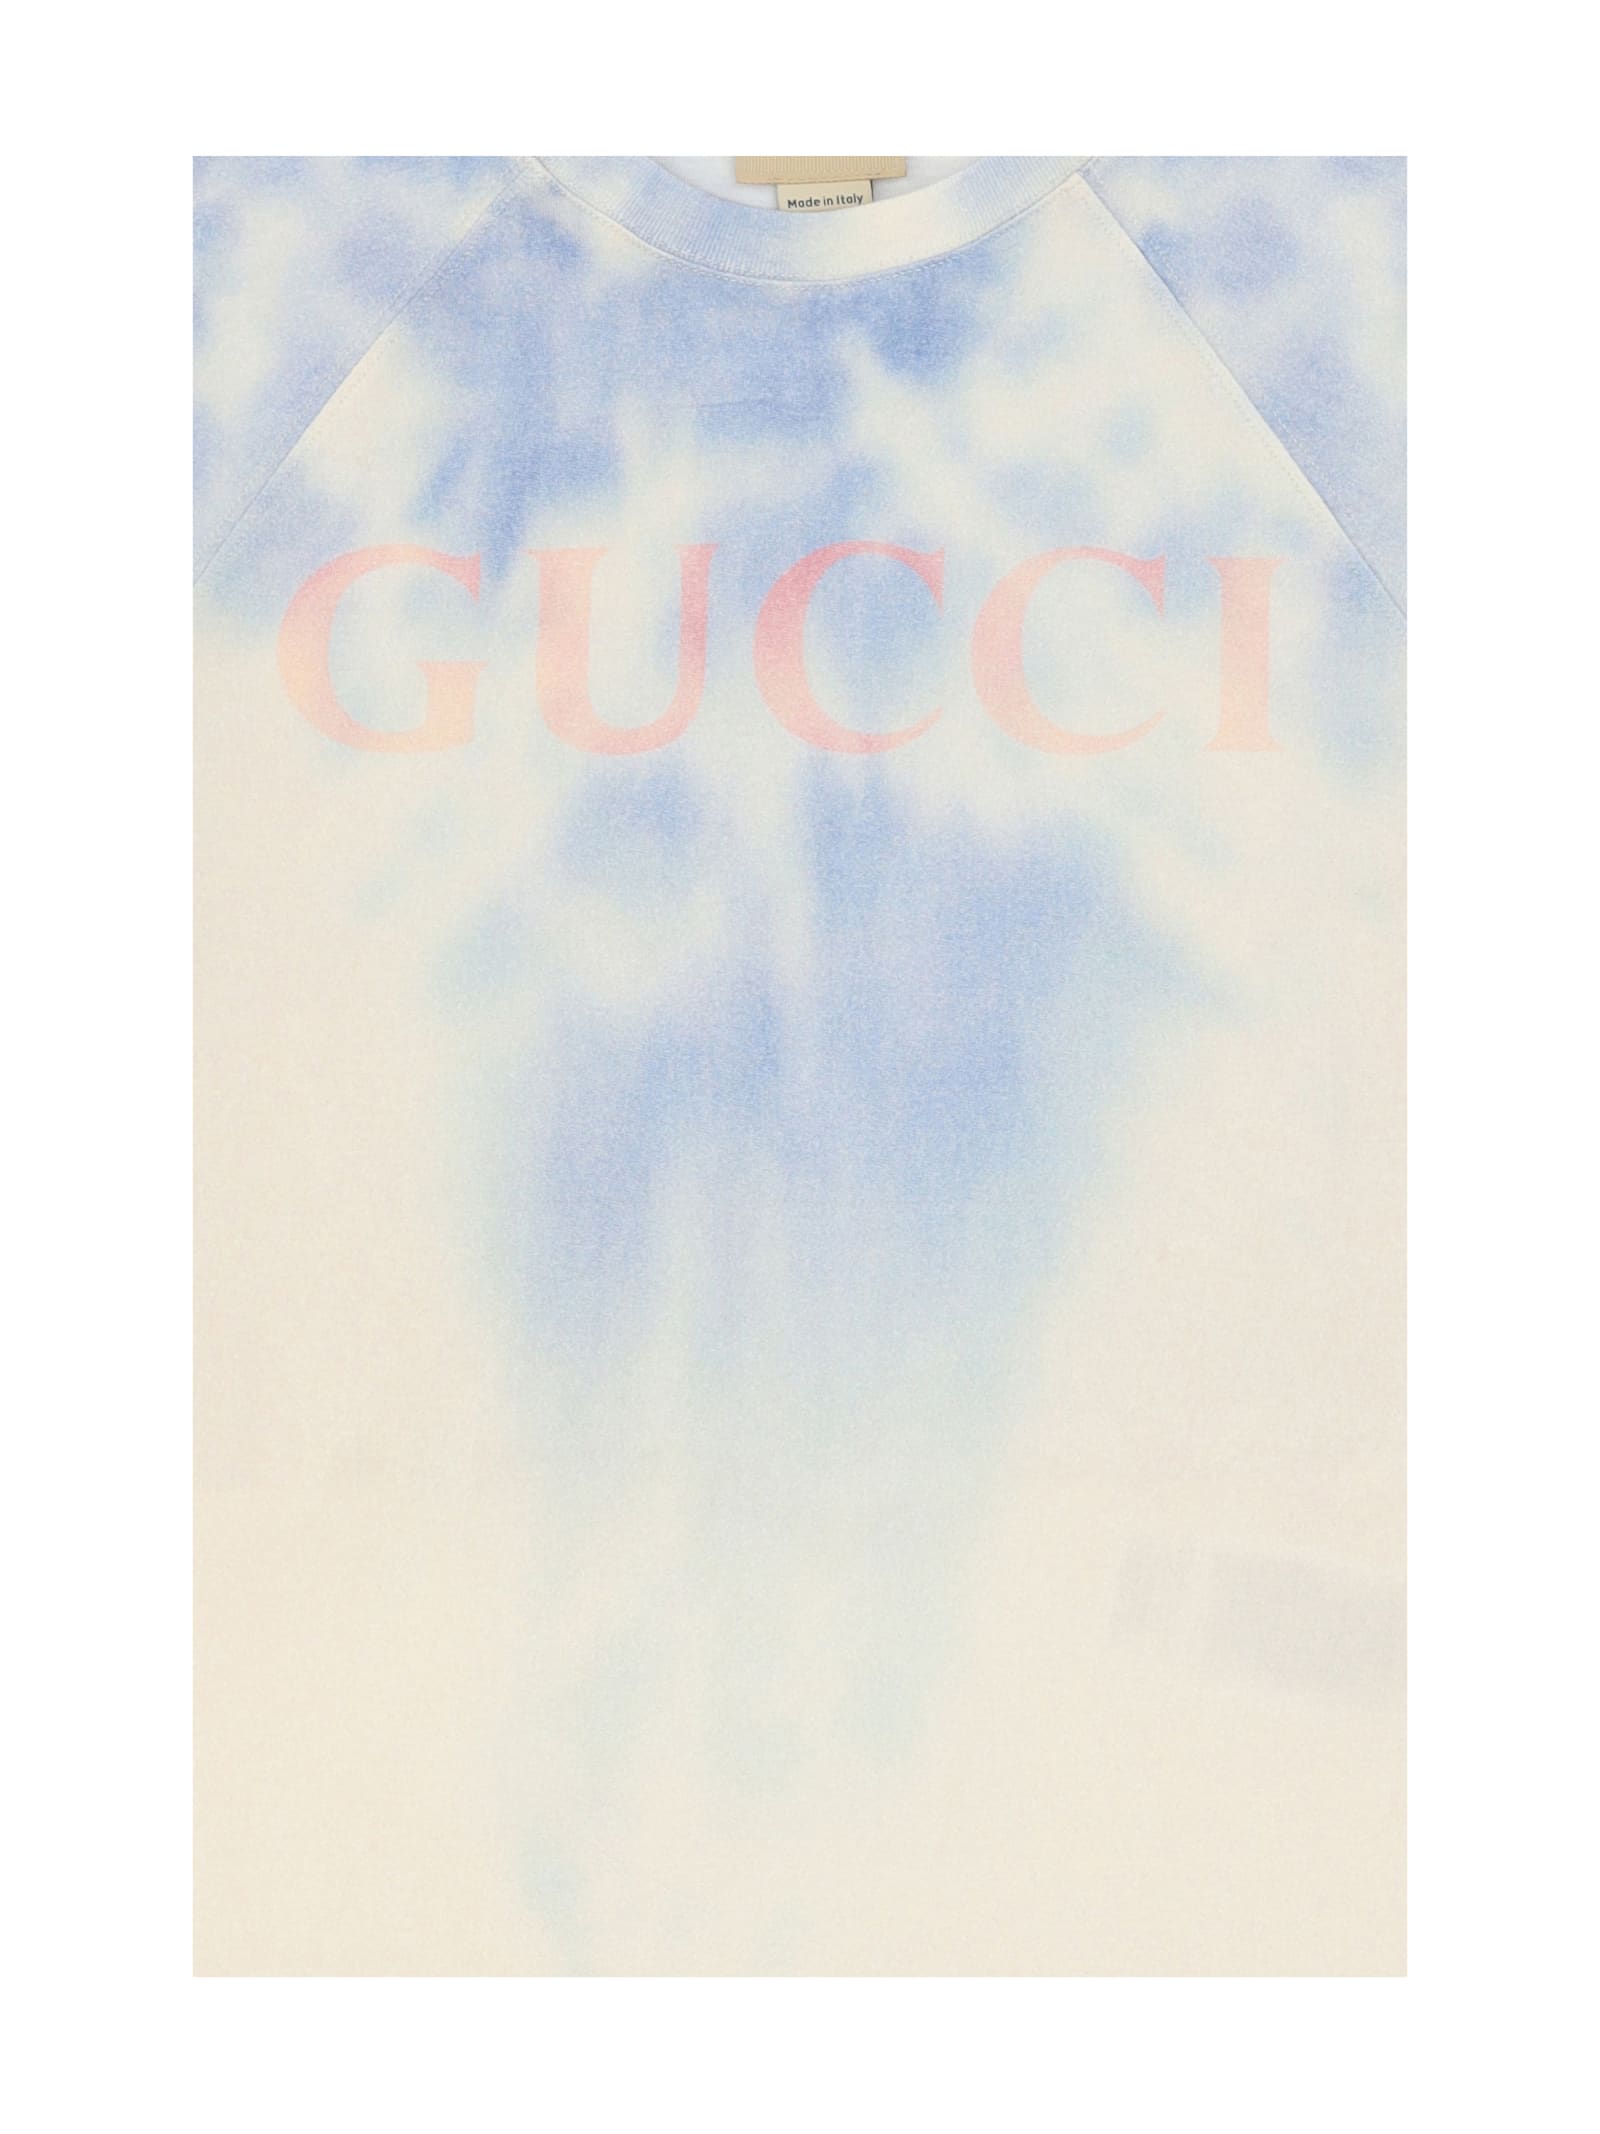 Shop Gucci T-shirt For Boy In Dusty White/blue